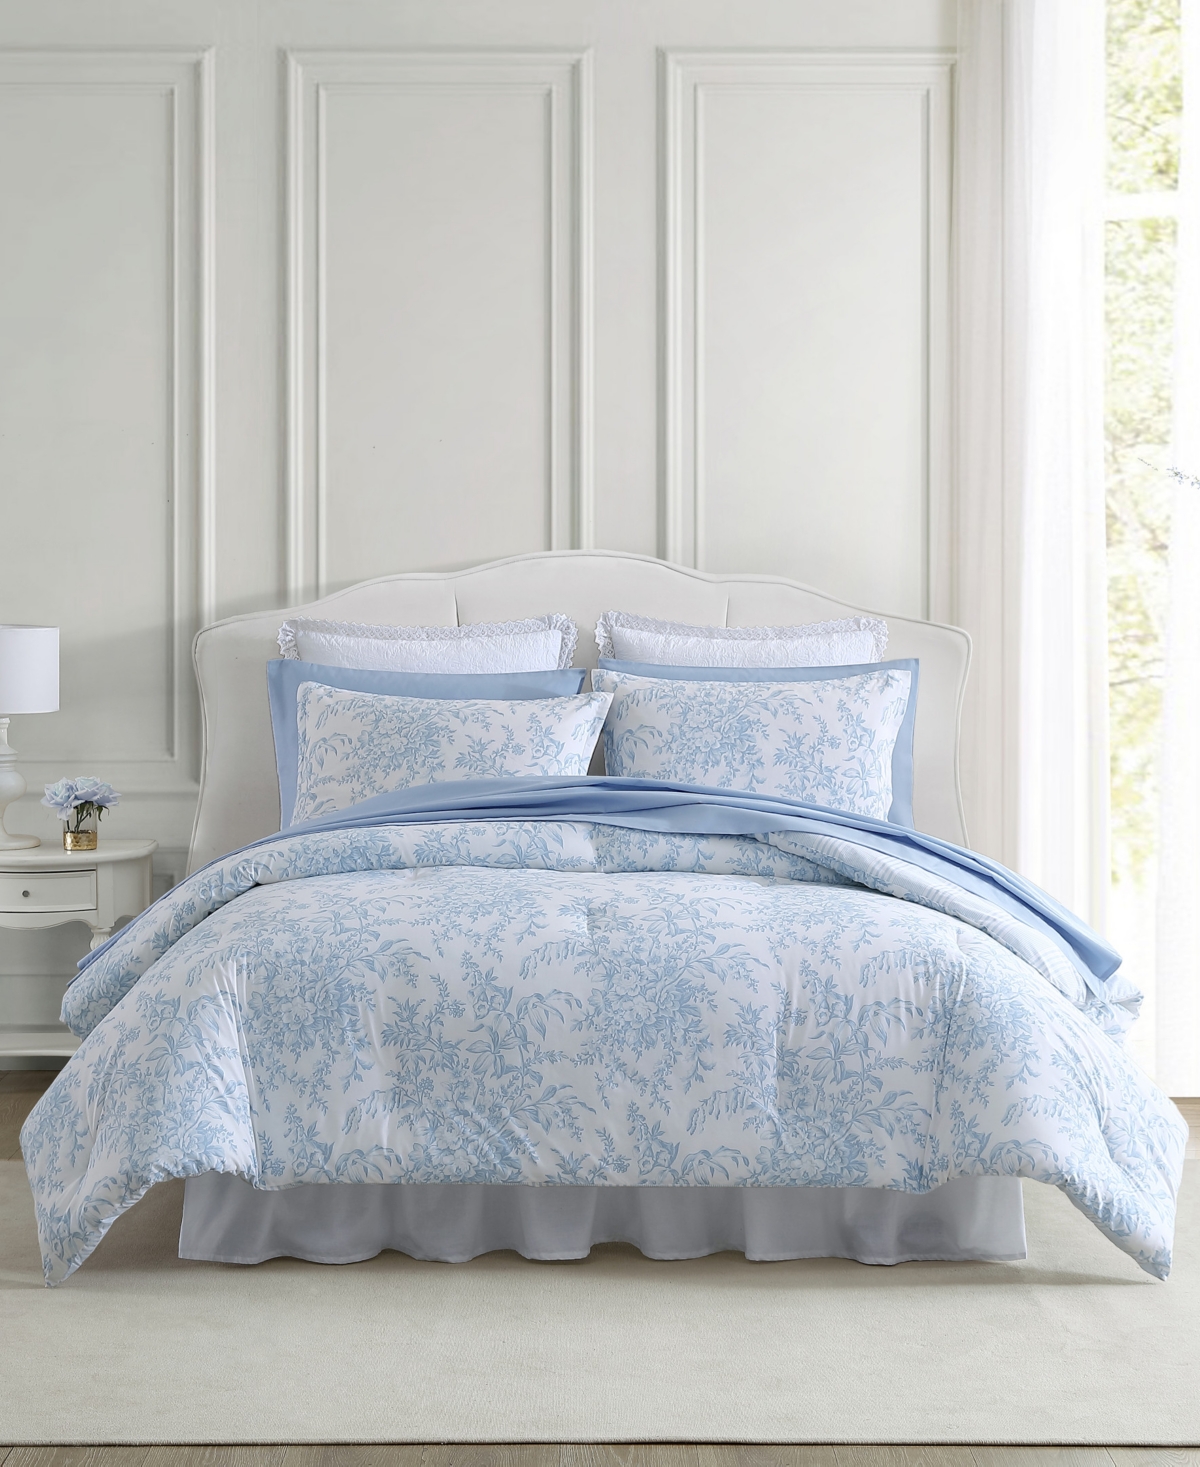 Laura Ashley Bedford Cotton Reversible 2 Piece Comforter Set, Twin In Blue Cashmere,white